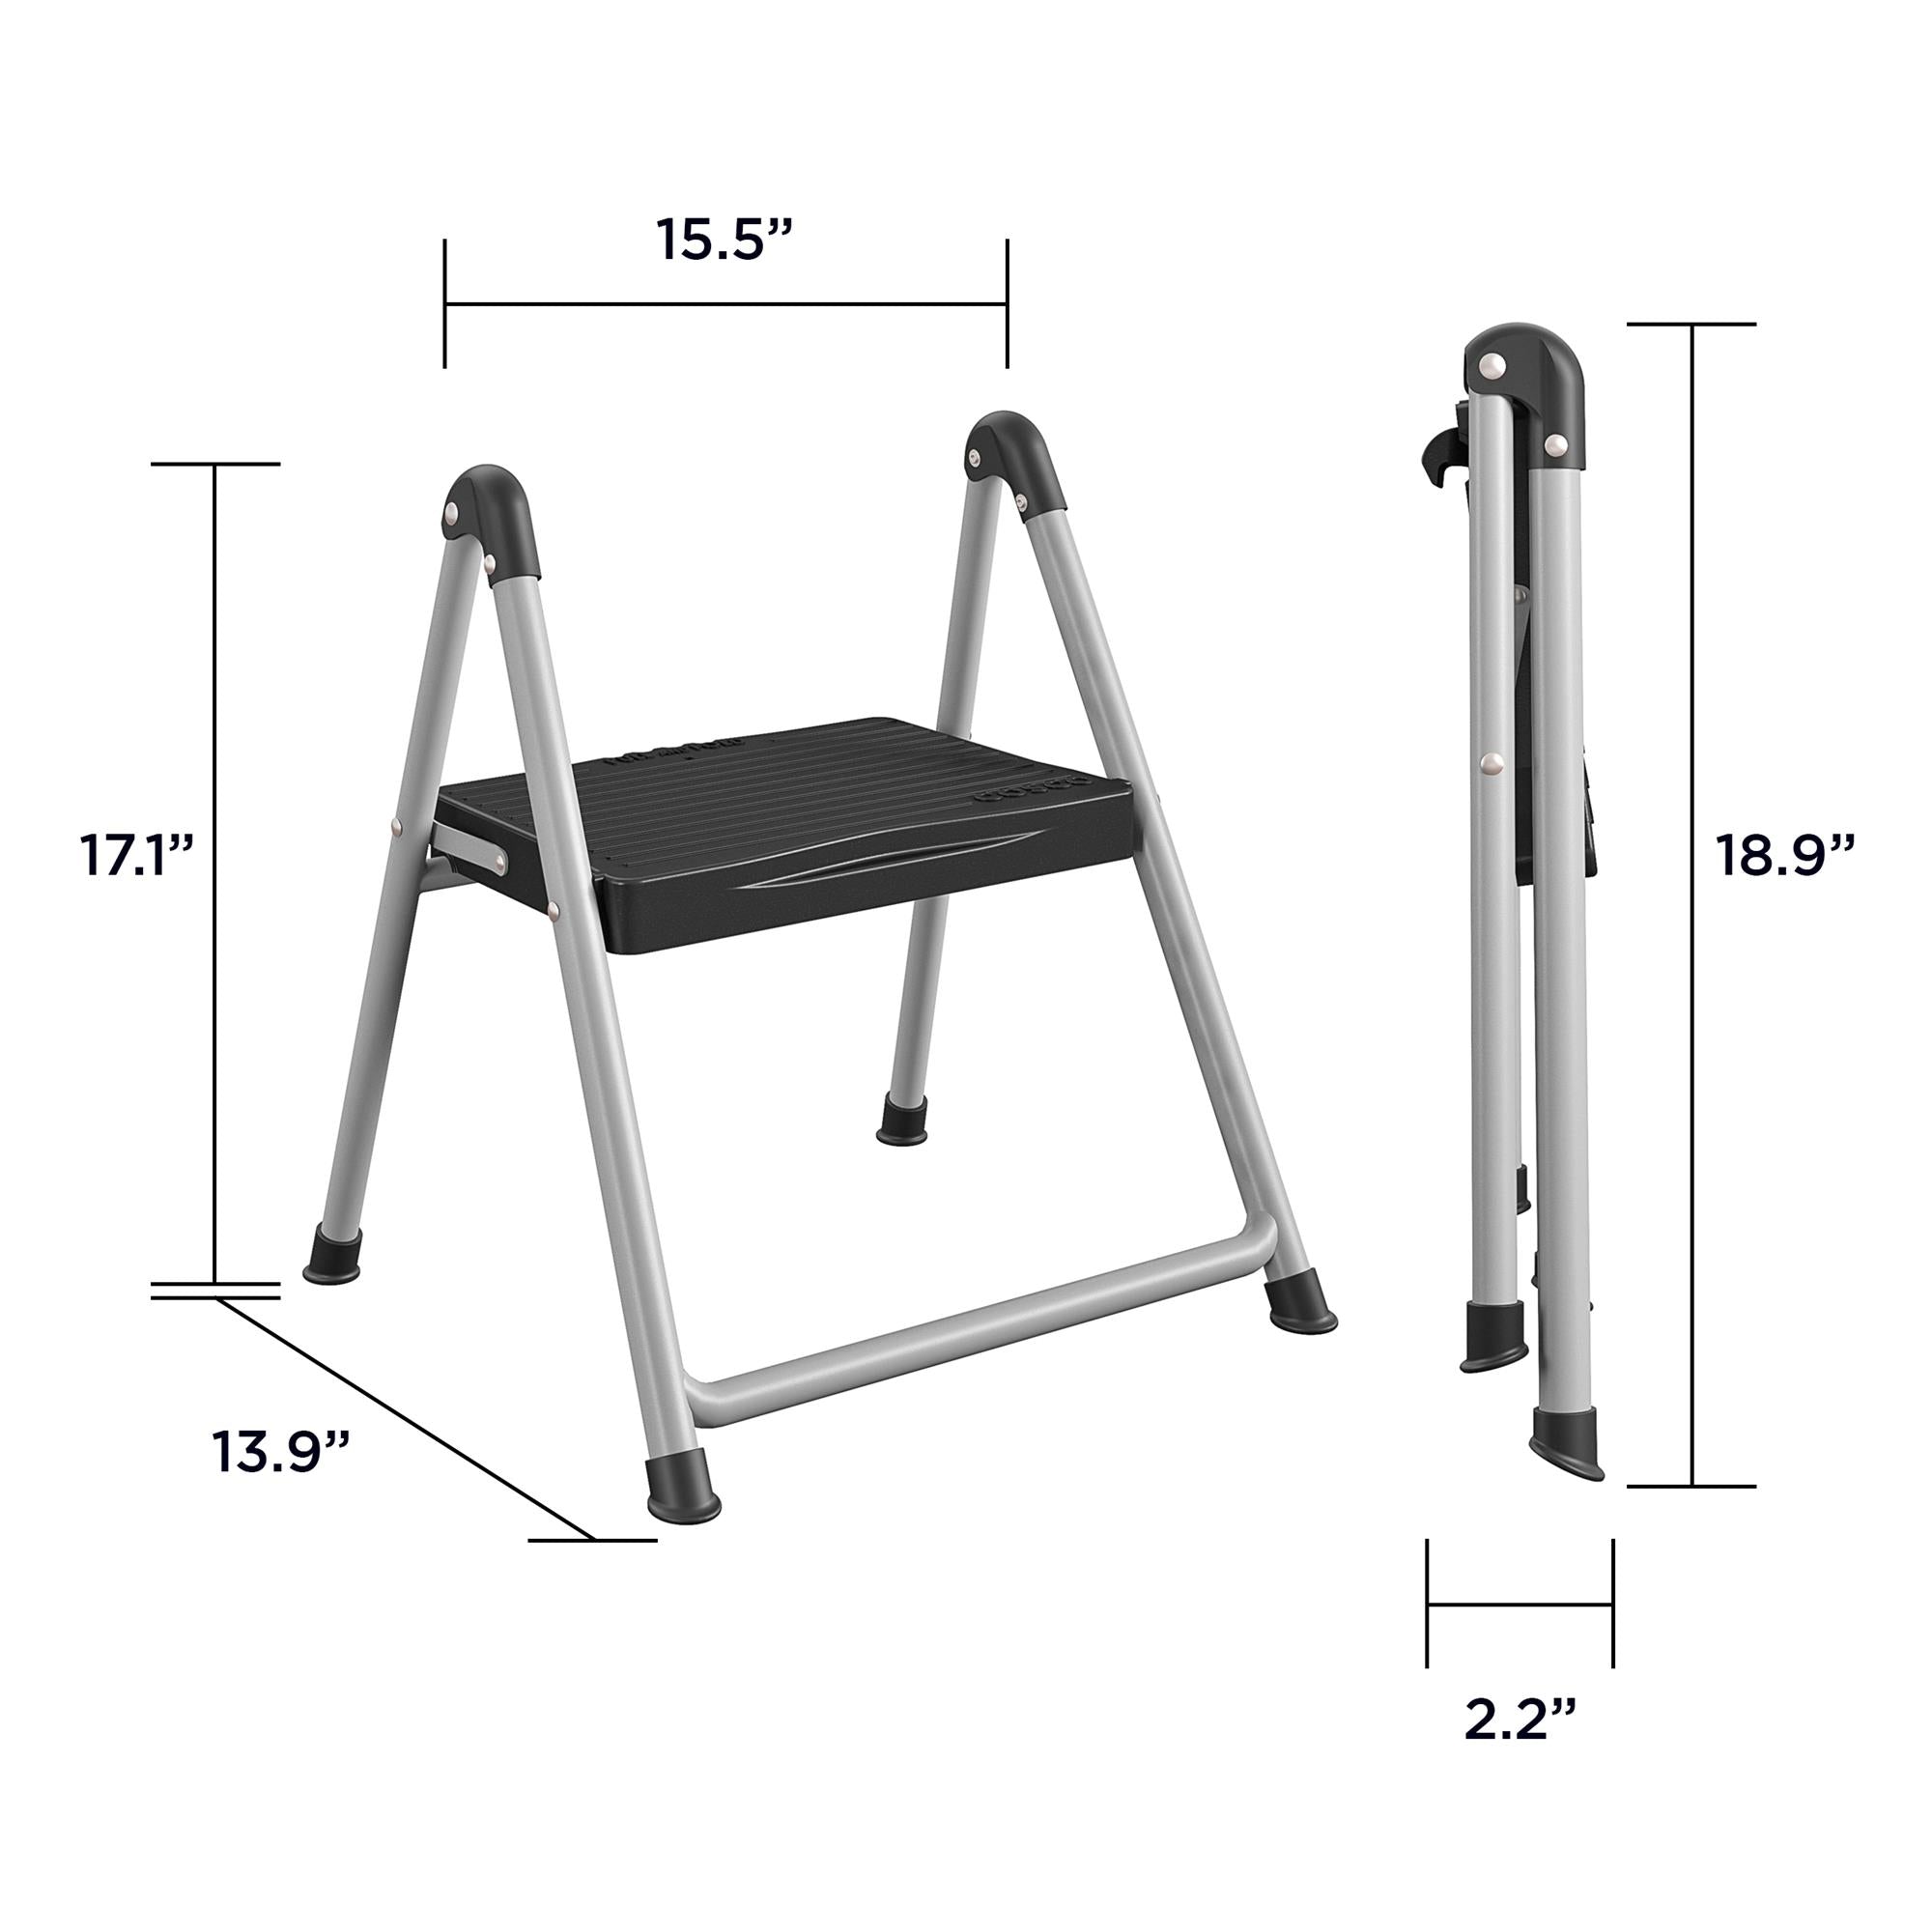 One-Step Step Stool without Handle - Platinum/Black - 1 Step 